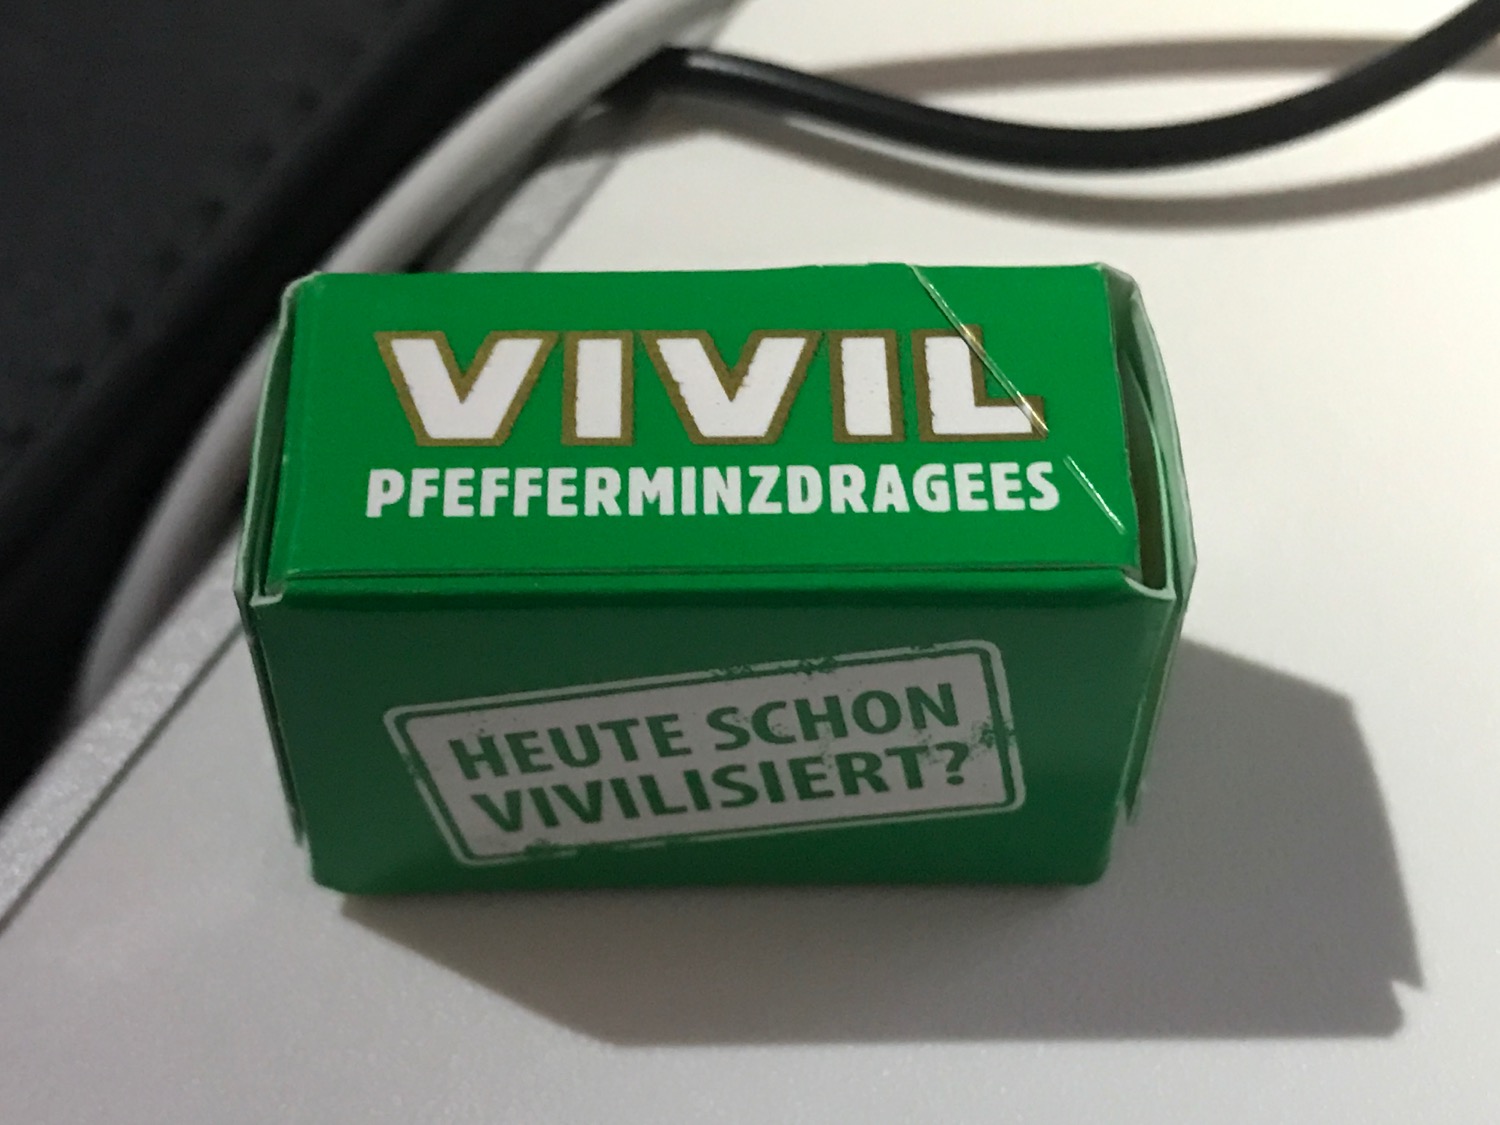 a green box with white text on it